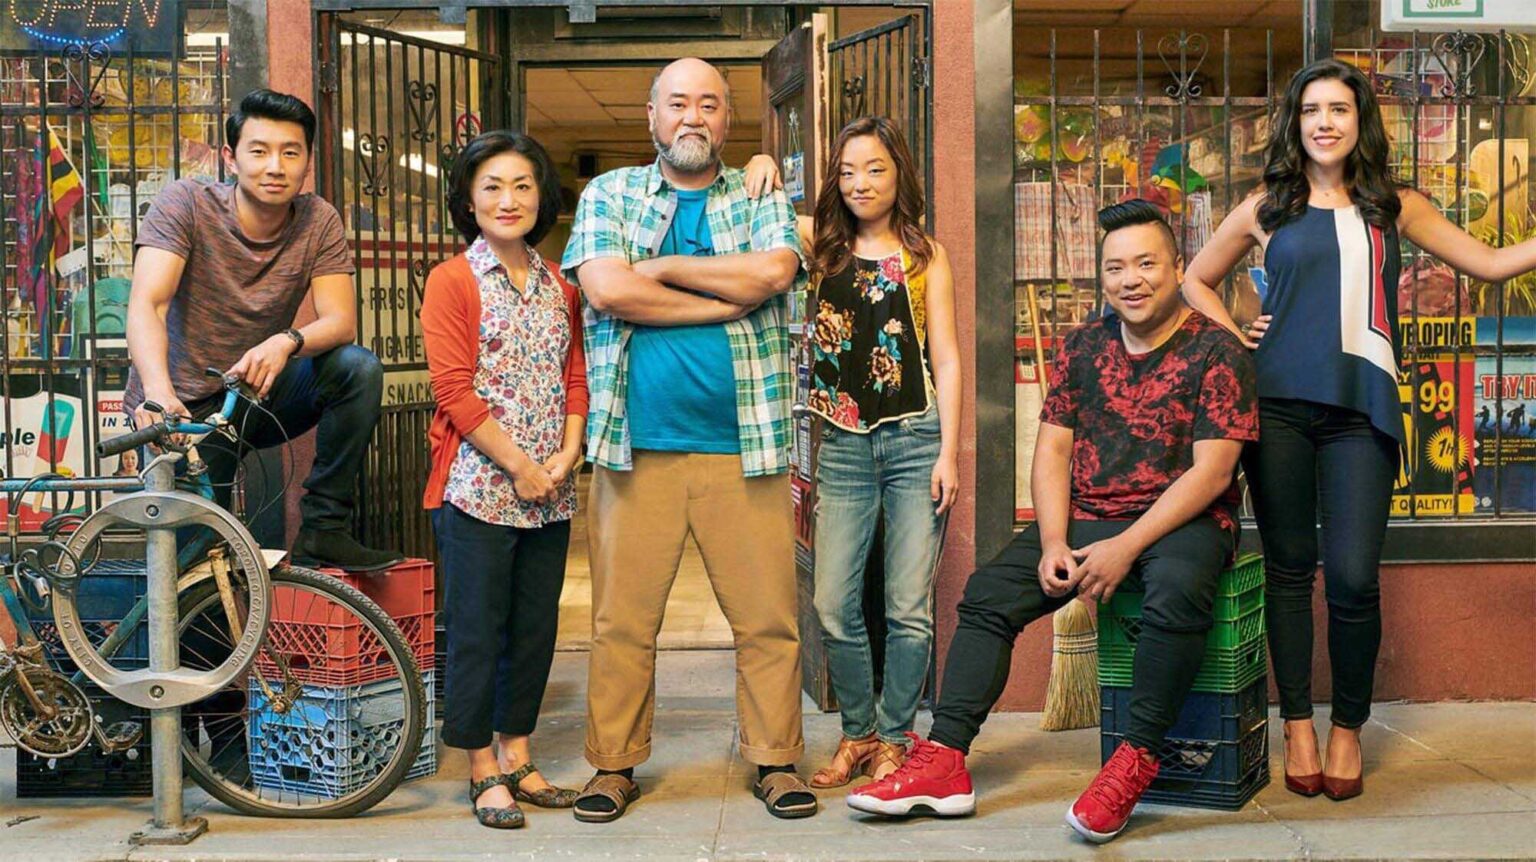 'Kim's Convenience' has been cancelled abruptly, denied a true ending. How are the cast reacting to the sad news?